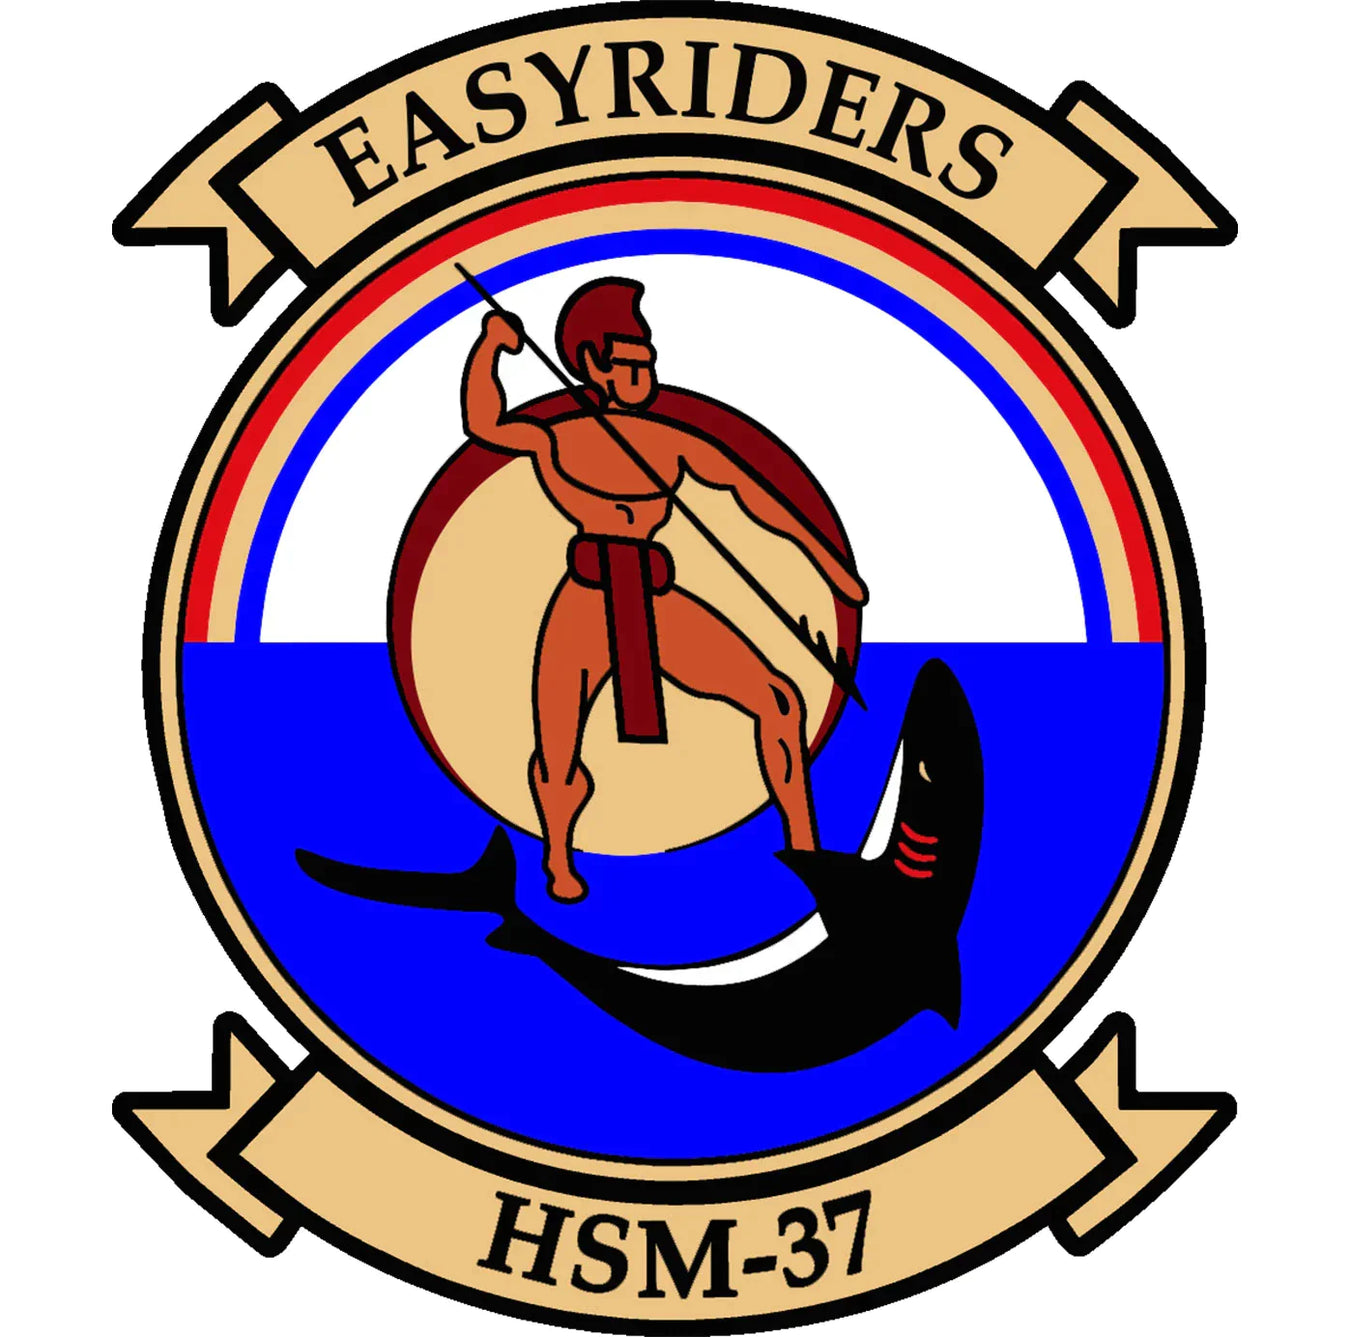 Helicopter Maritime Strike Squadron 37 (HSM-37) "Easyriders"